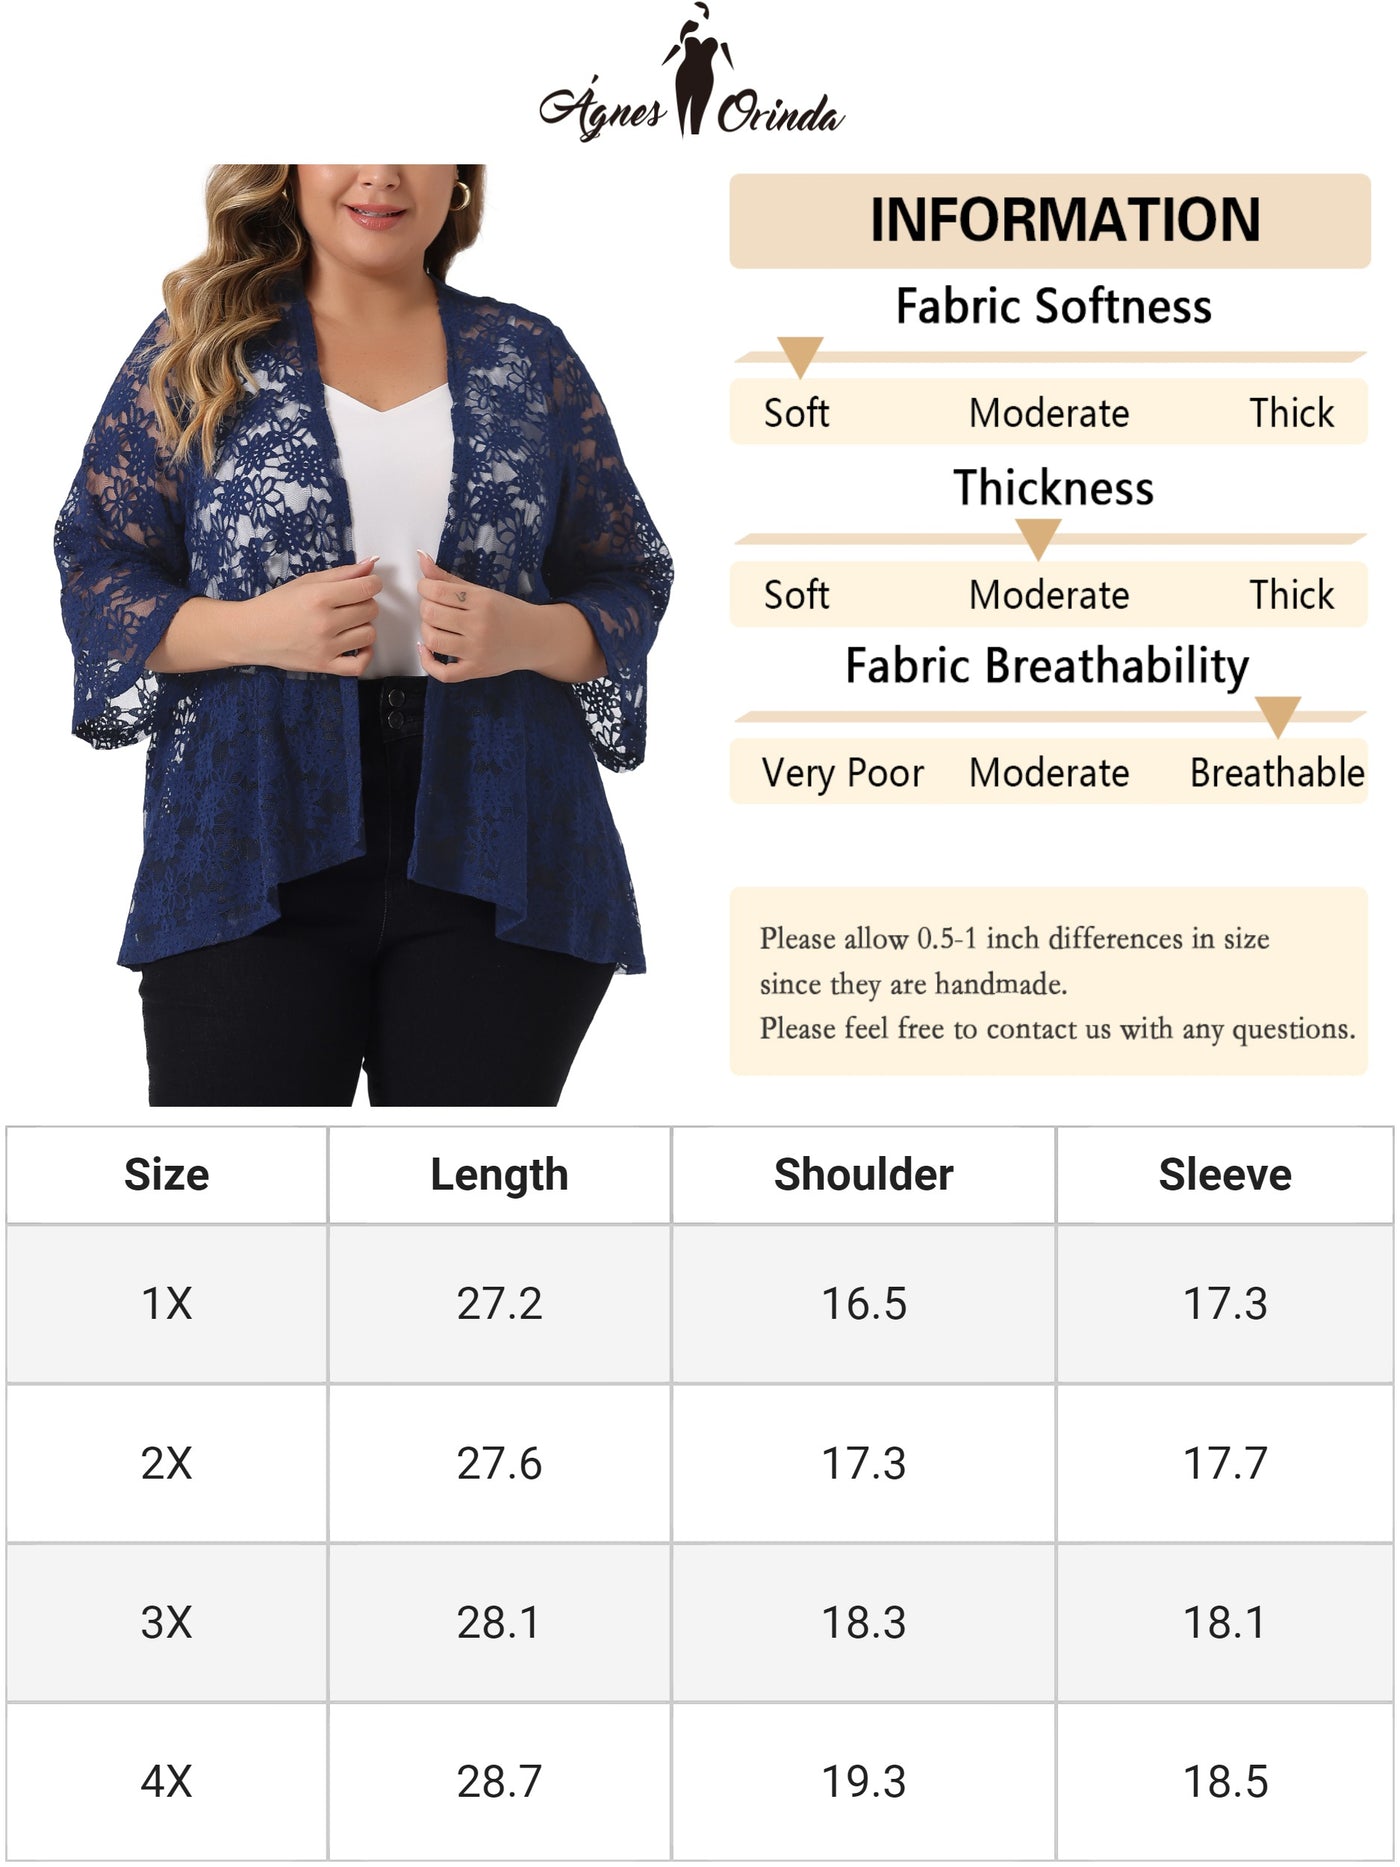 Bublédon Plus Size Open Front 3/4 Sleeve Sheer Casual Lace Cover Up